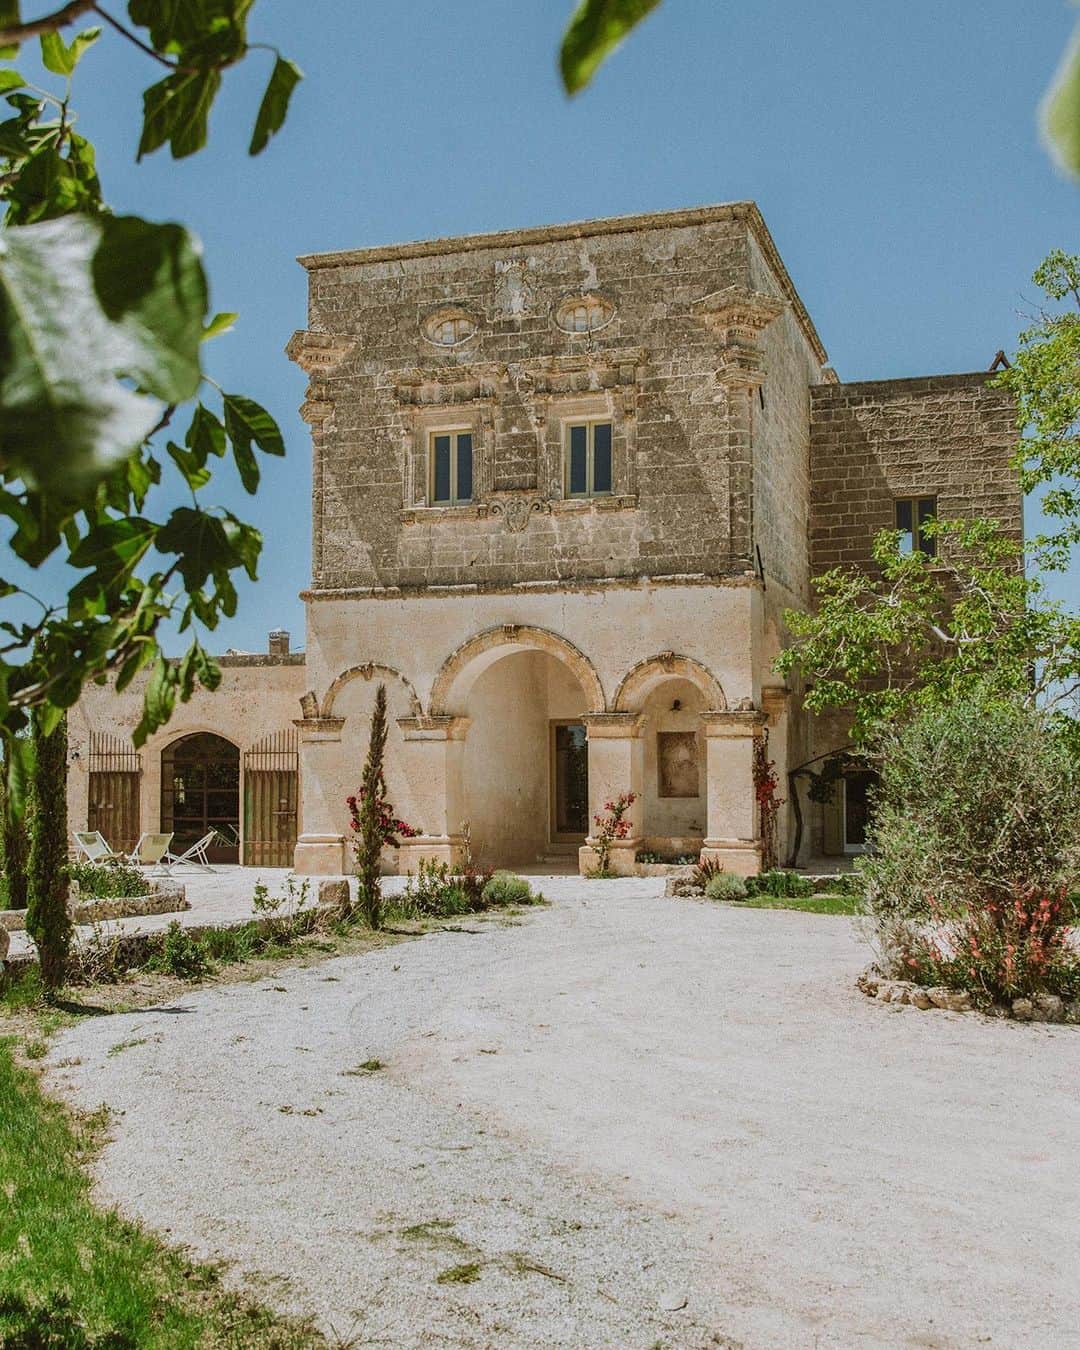 BEAUTIFUL HOTELSのインスタグラム：「Stepping into timeless elegance at IL BARONE in Puglia, captured by @specialpuglia! 🏰✨ This splendid country villa has been sensitively restored, revealing its warm stone and stunning architecture - accompanied by a sleek pool and gardens. And with room for ten across five chic bedrooms, you can gather here with your dream getaway squad. 🌿  Who's visited Puglia, Italy? 🌞   📸 @specialpuglia 📍 IL BARONE, Nardò, Puglia, Italy」